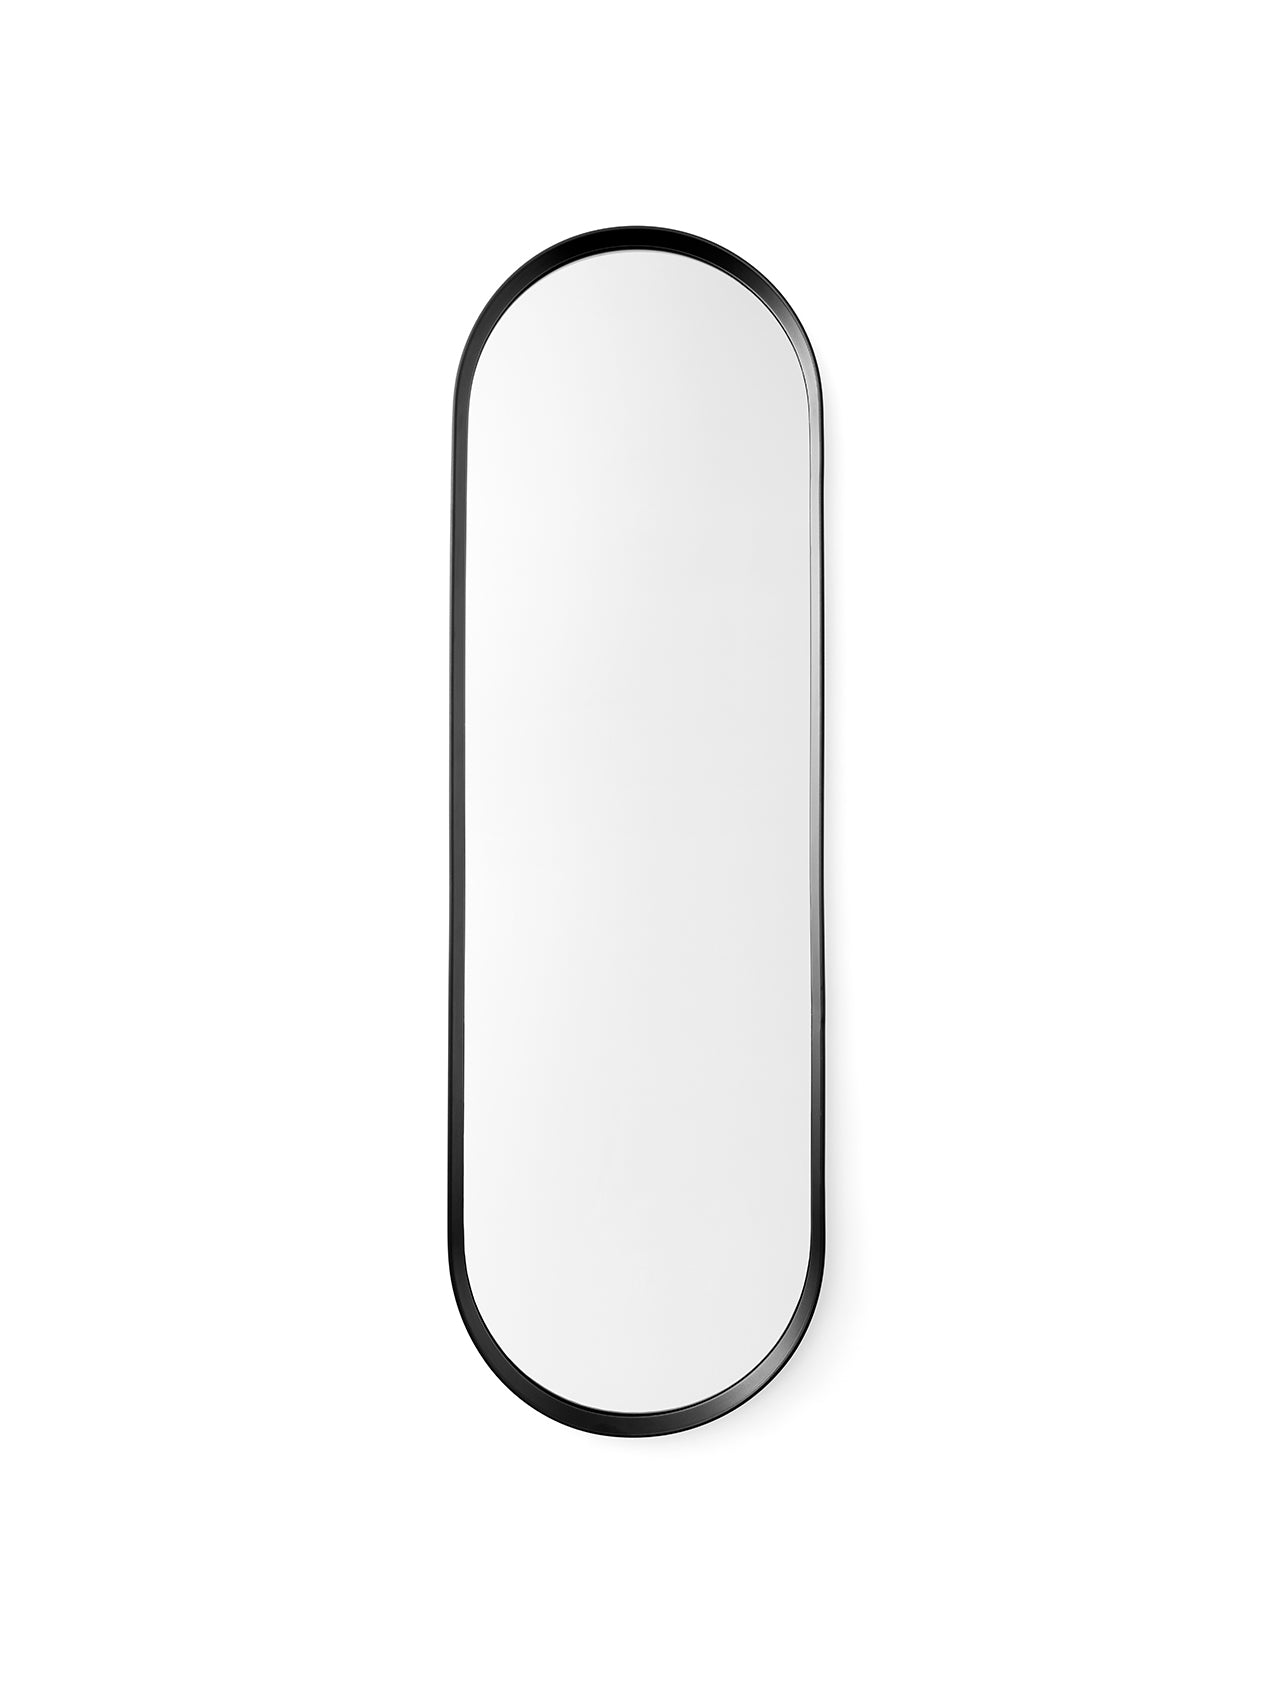 Norm Wall Mirror, Oval